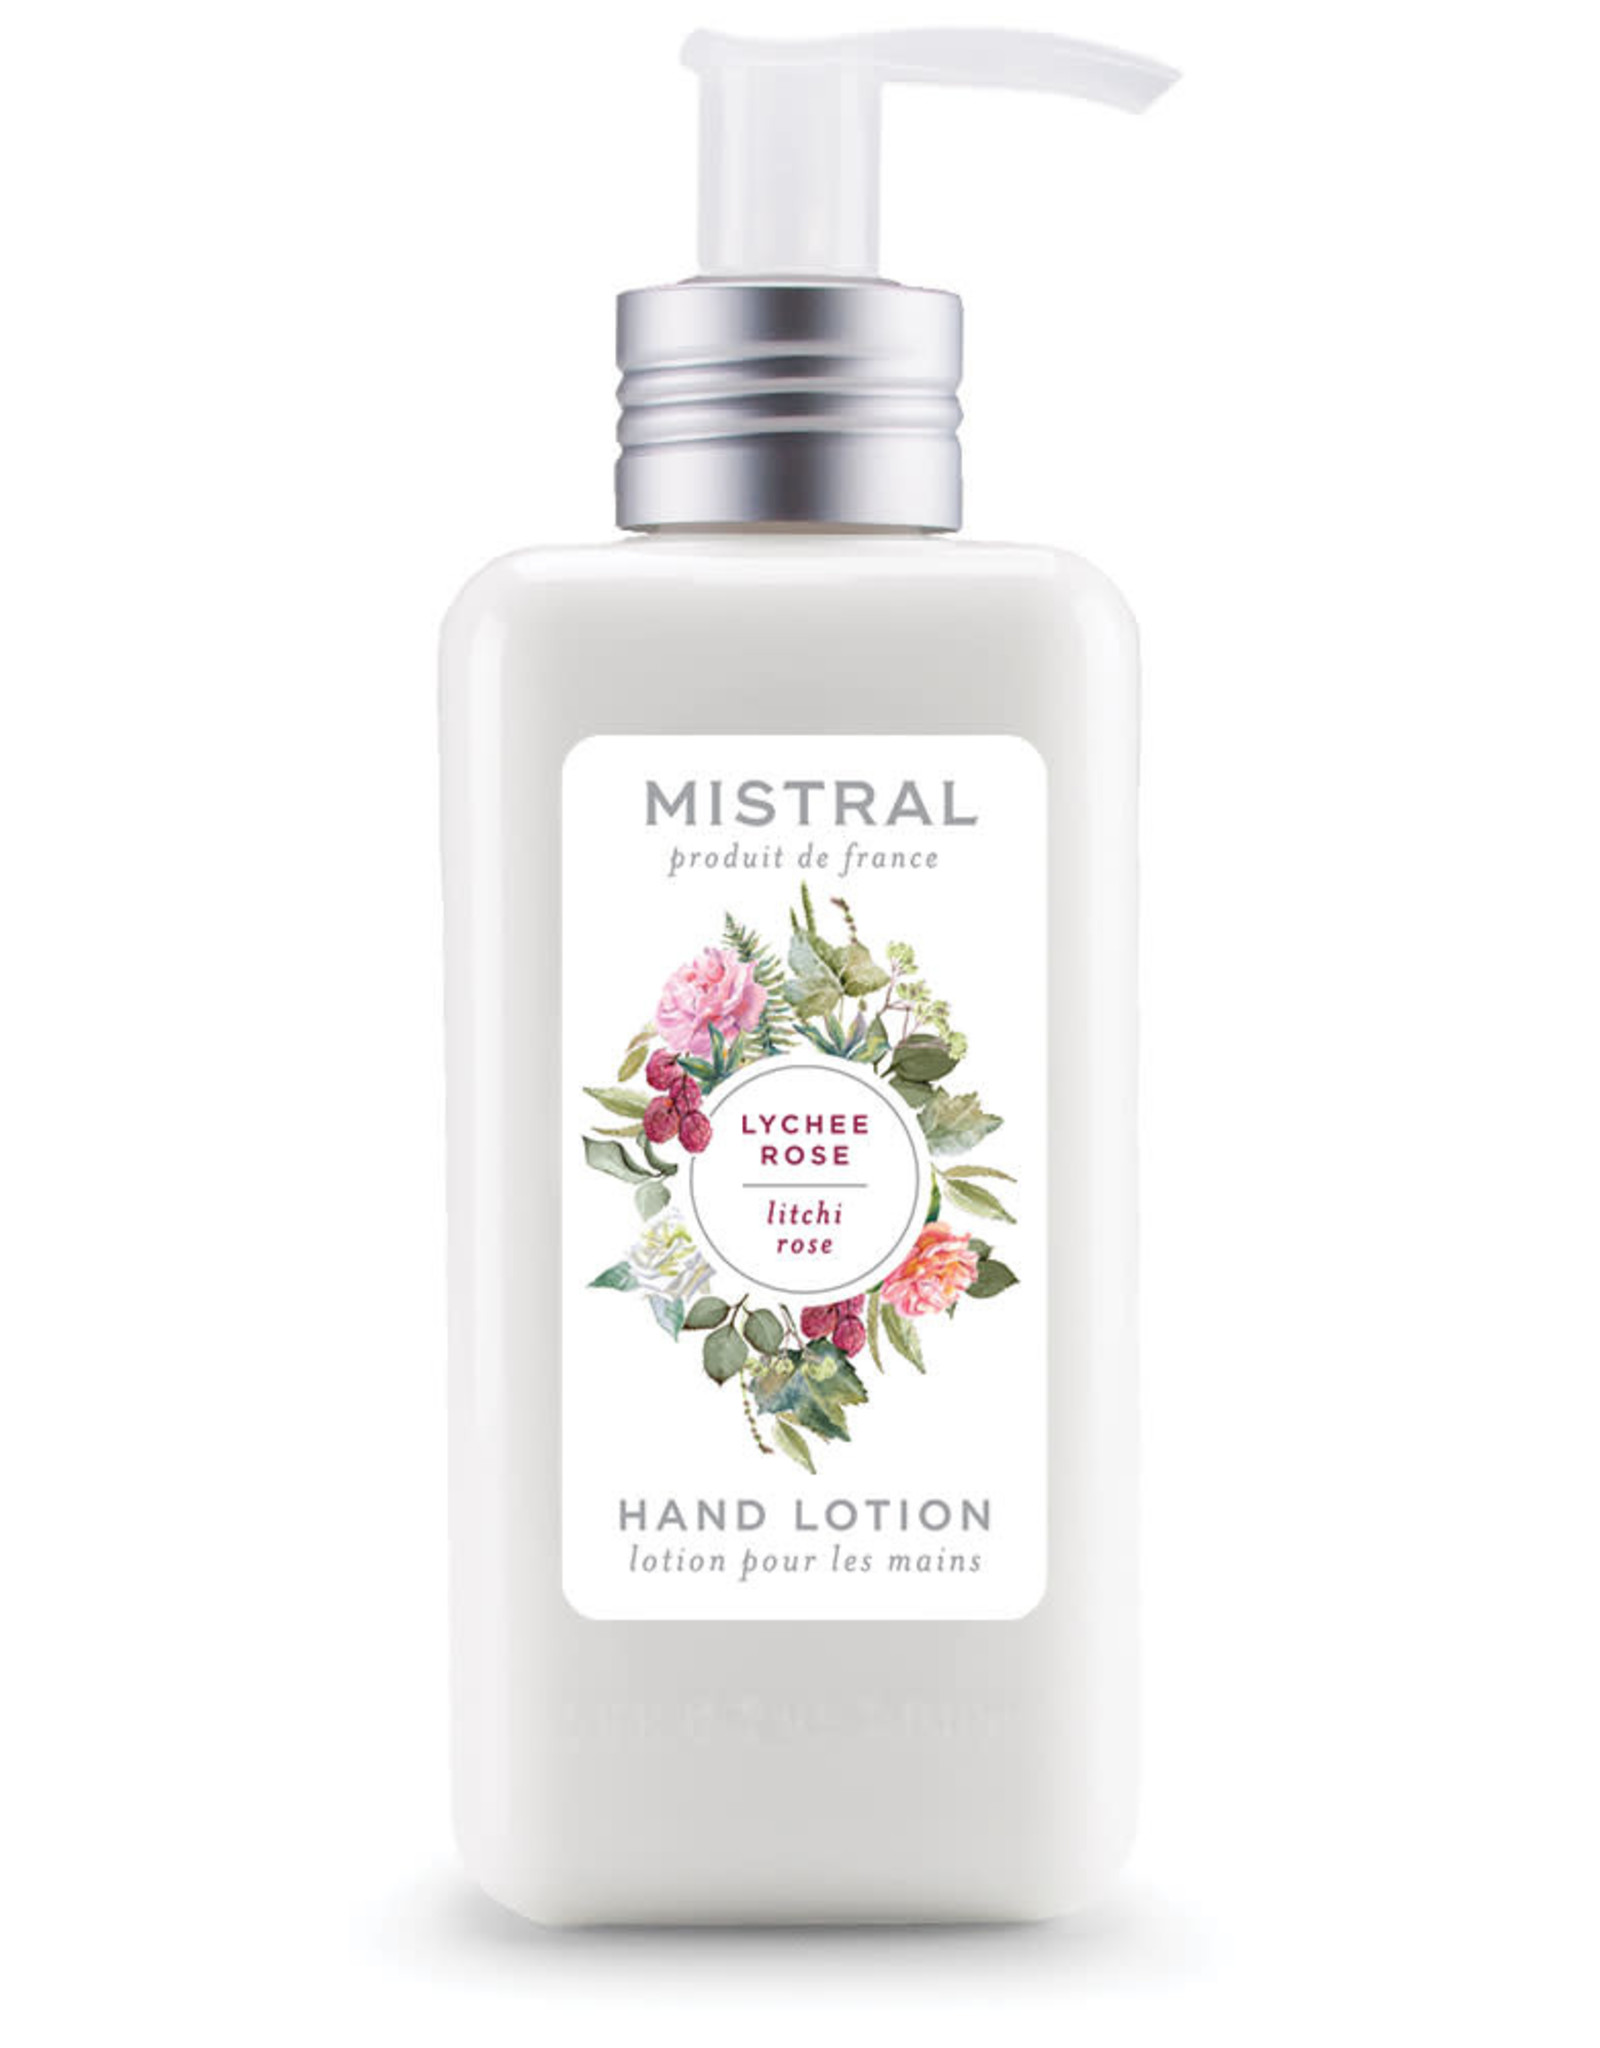 Lychee Rose Hand Lotion 10 oz. - Mistal Signature Collection